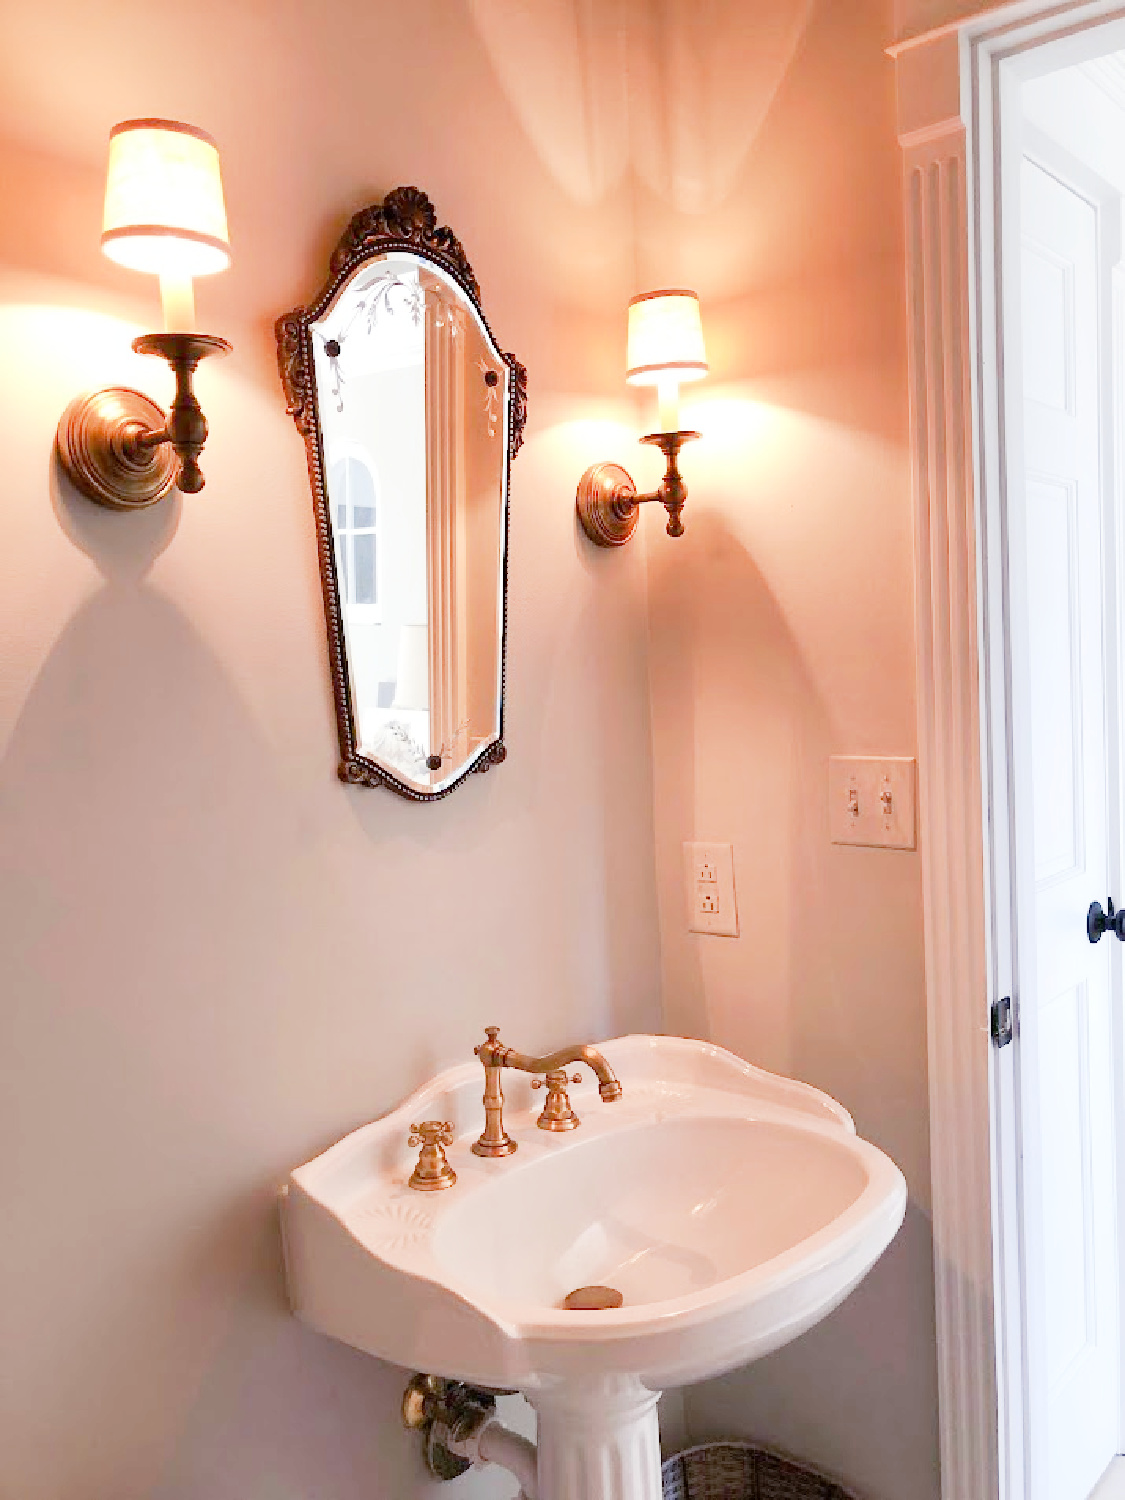 Vintage mirror and classic antique sconces in renovated powder bath - Hello Lovely Studio.